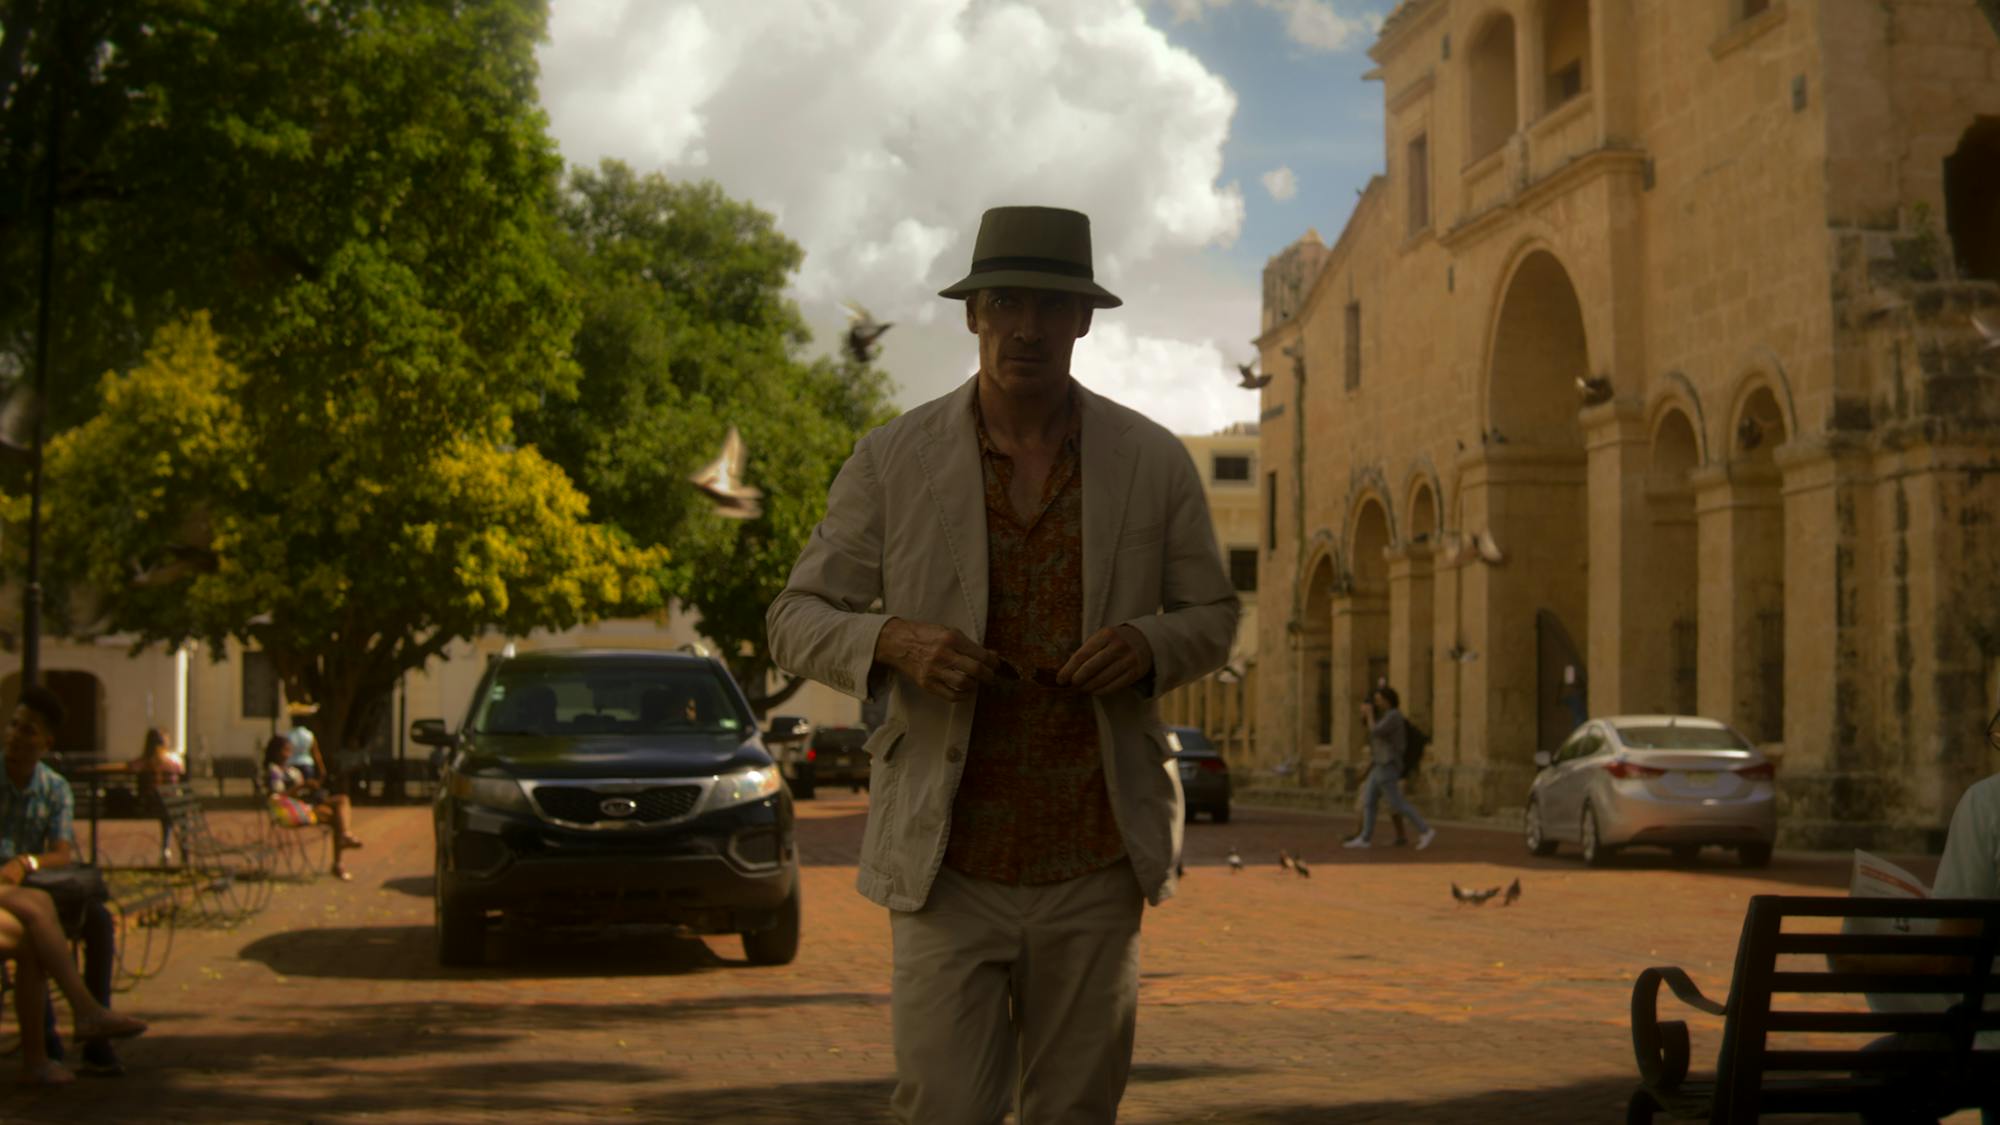 The Killer (Michael Fassbender) walks through a sunny scene in a tan suit and a bucket hat.